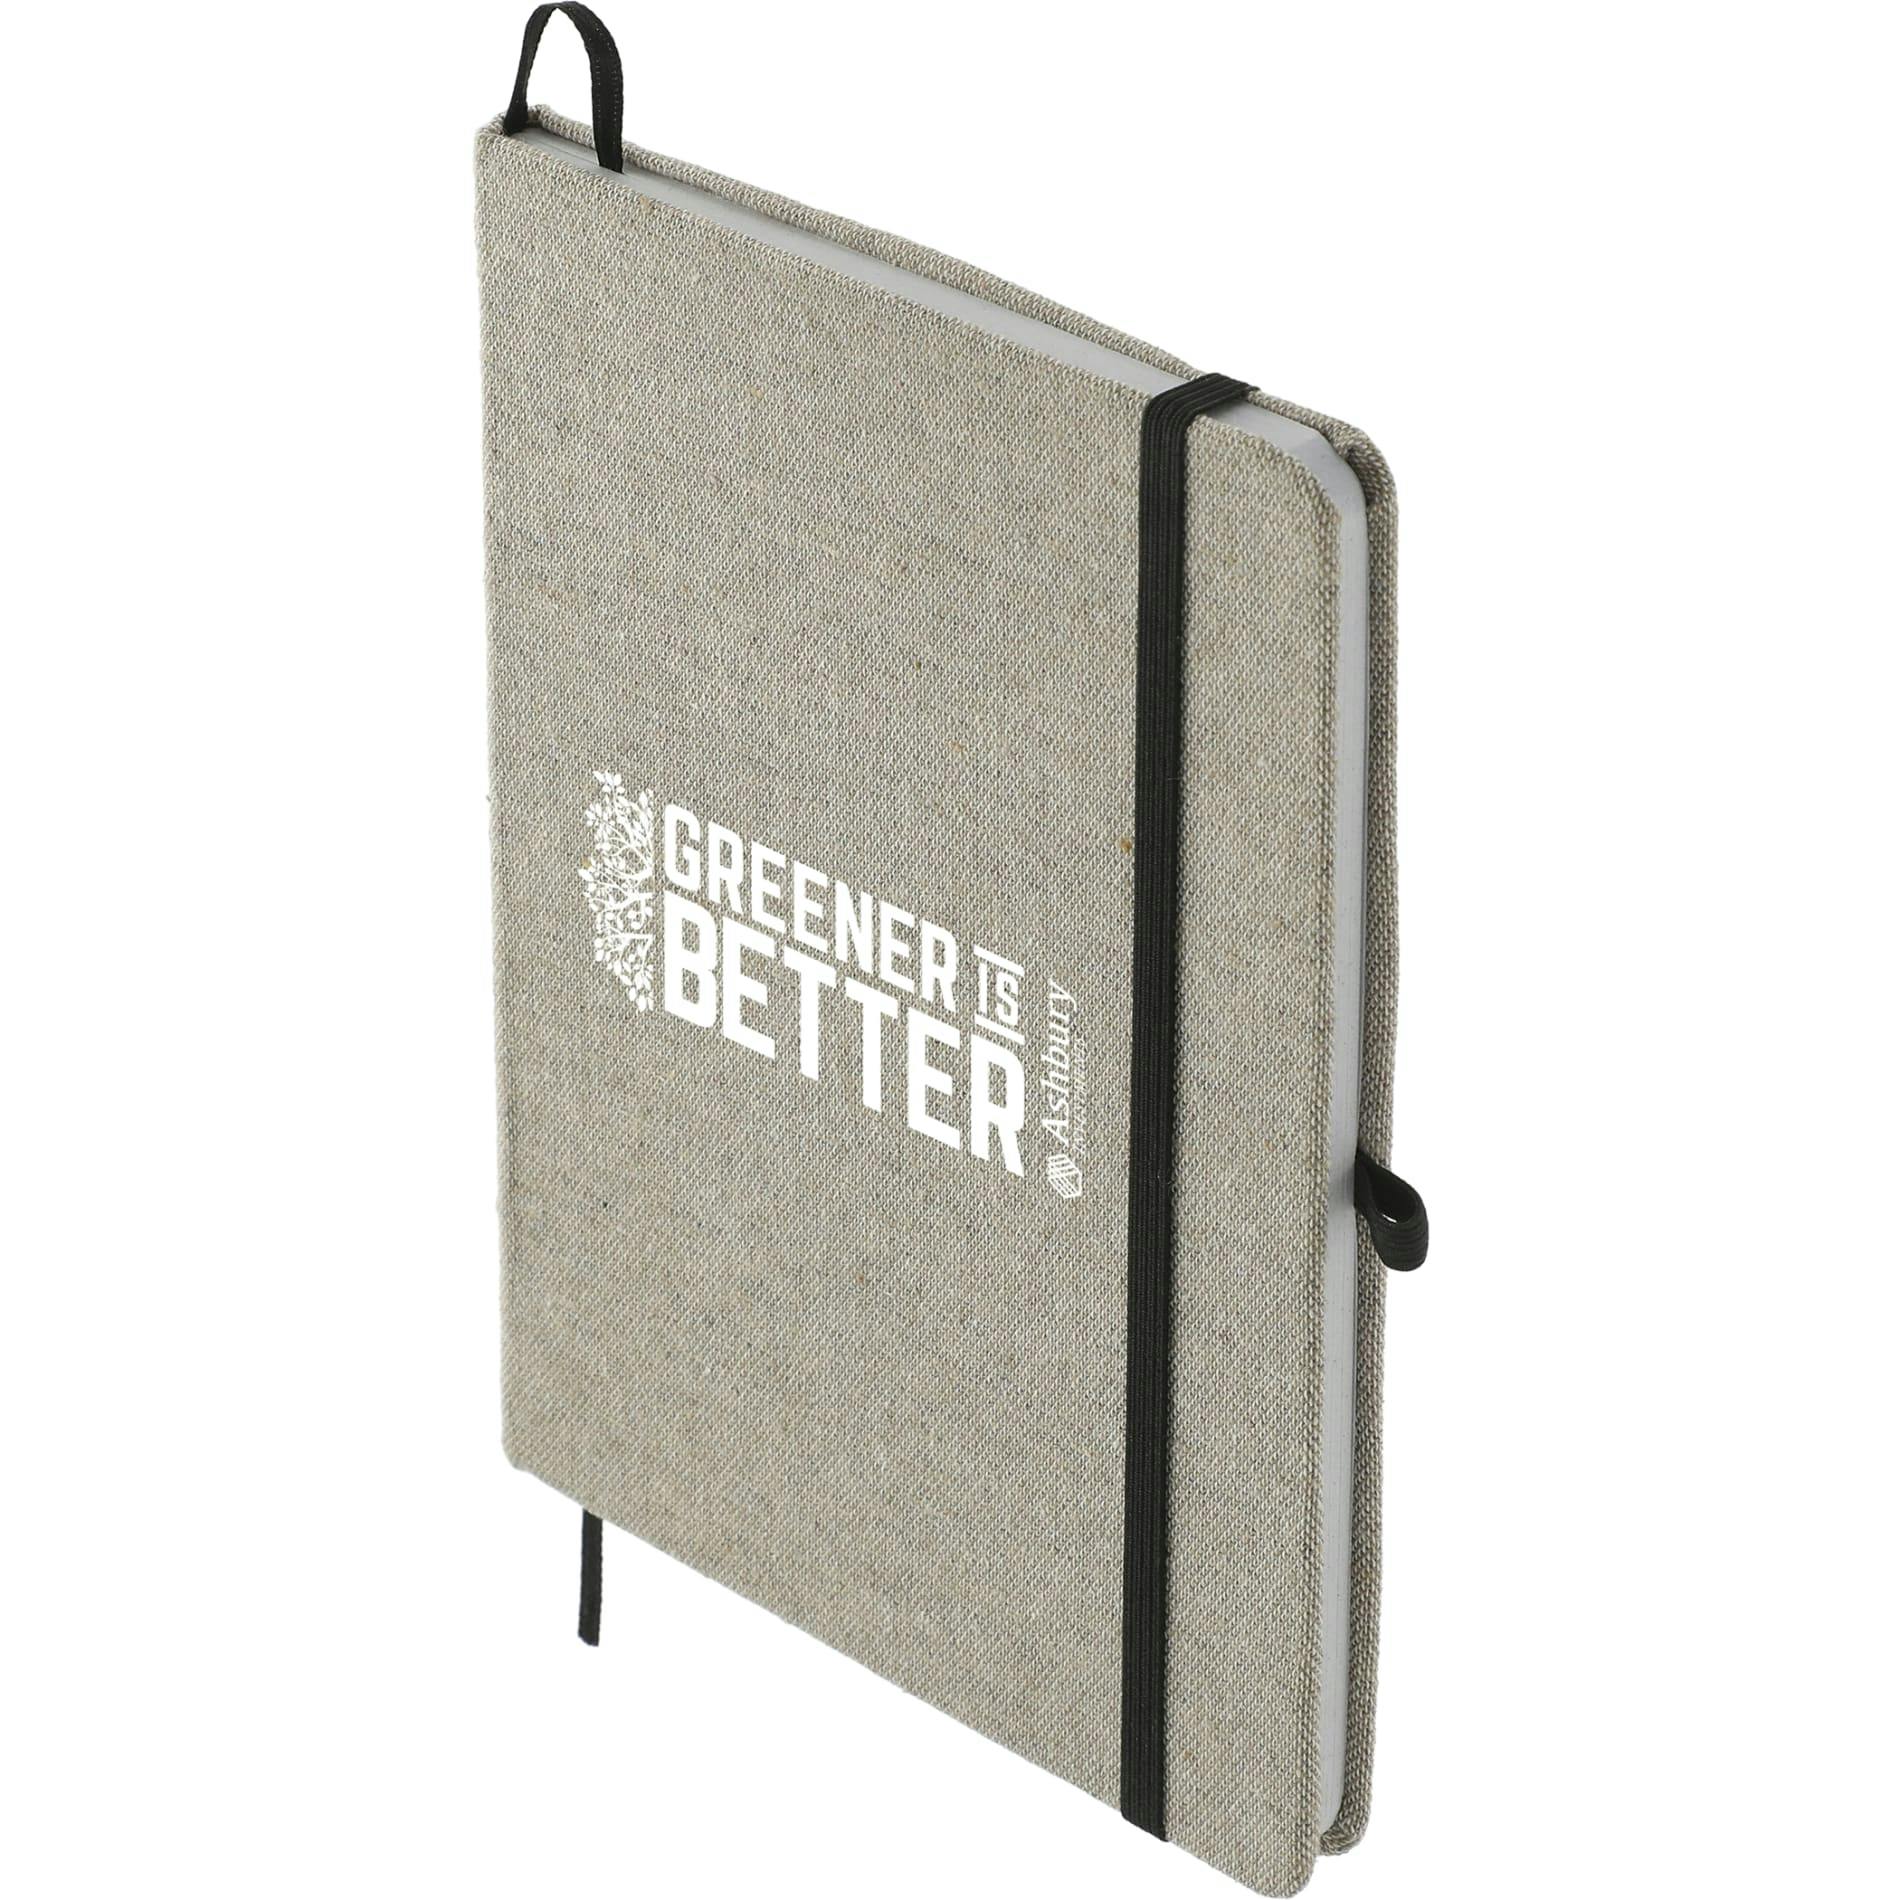 5" x 7" Recycled Cotton Bound Notebook - additional Image 2